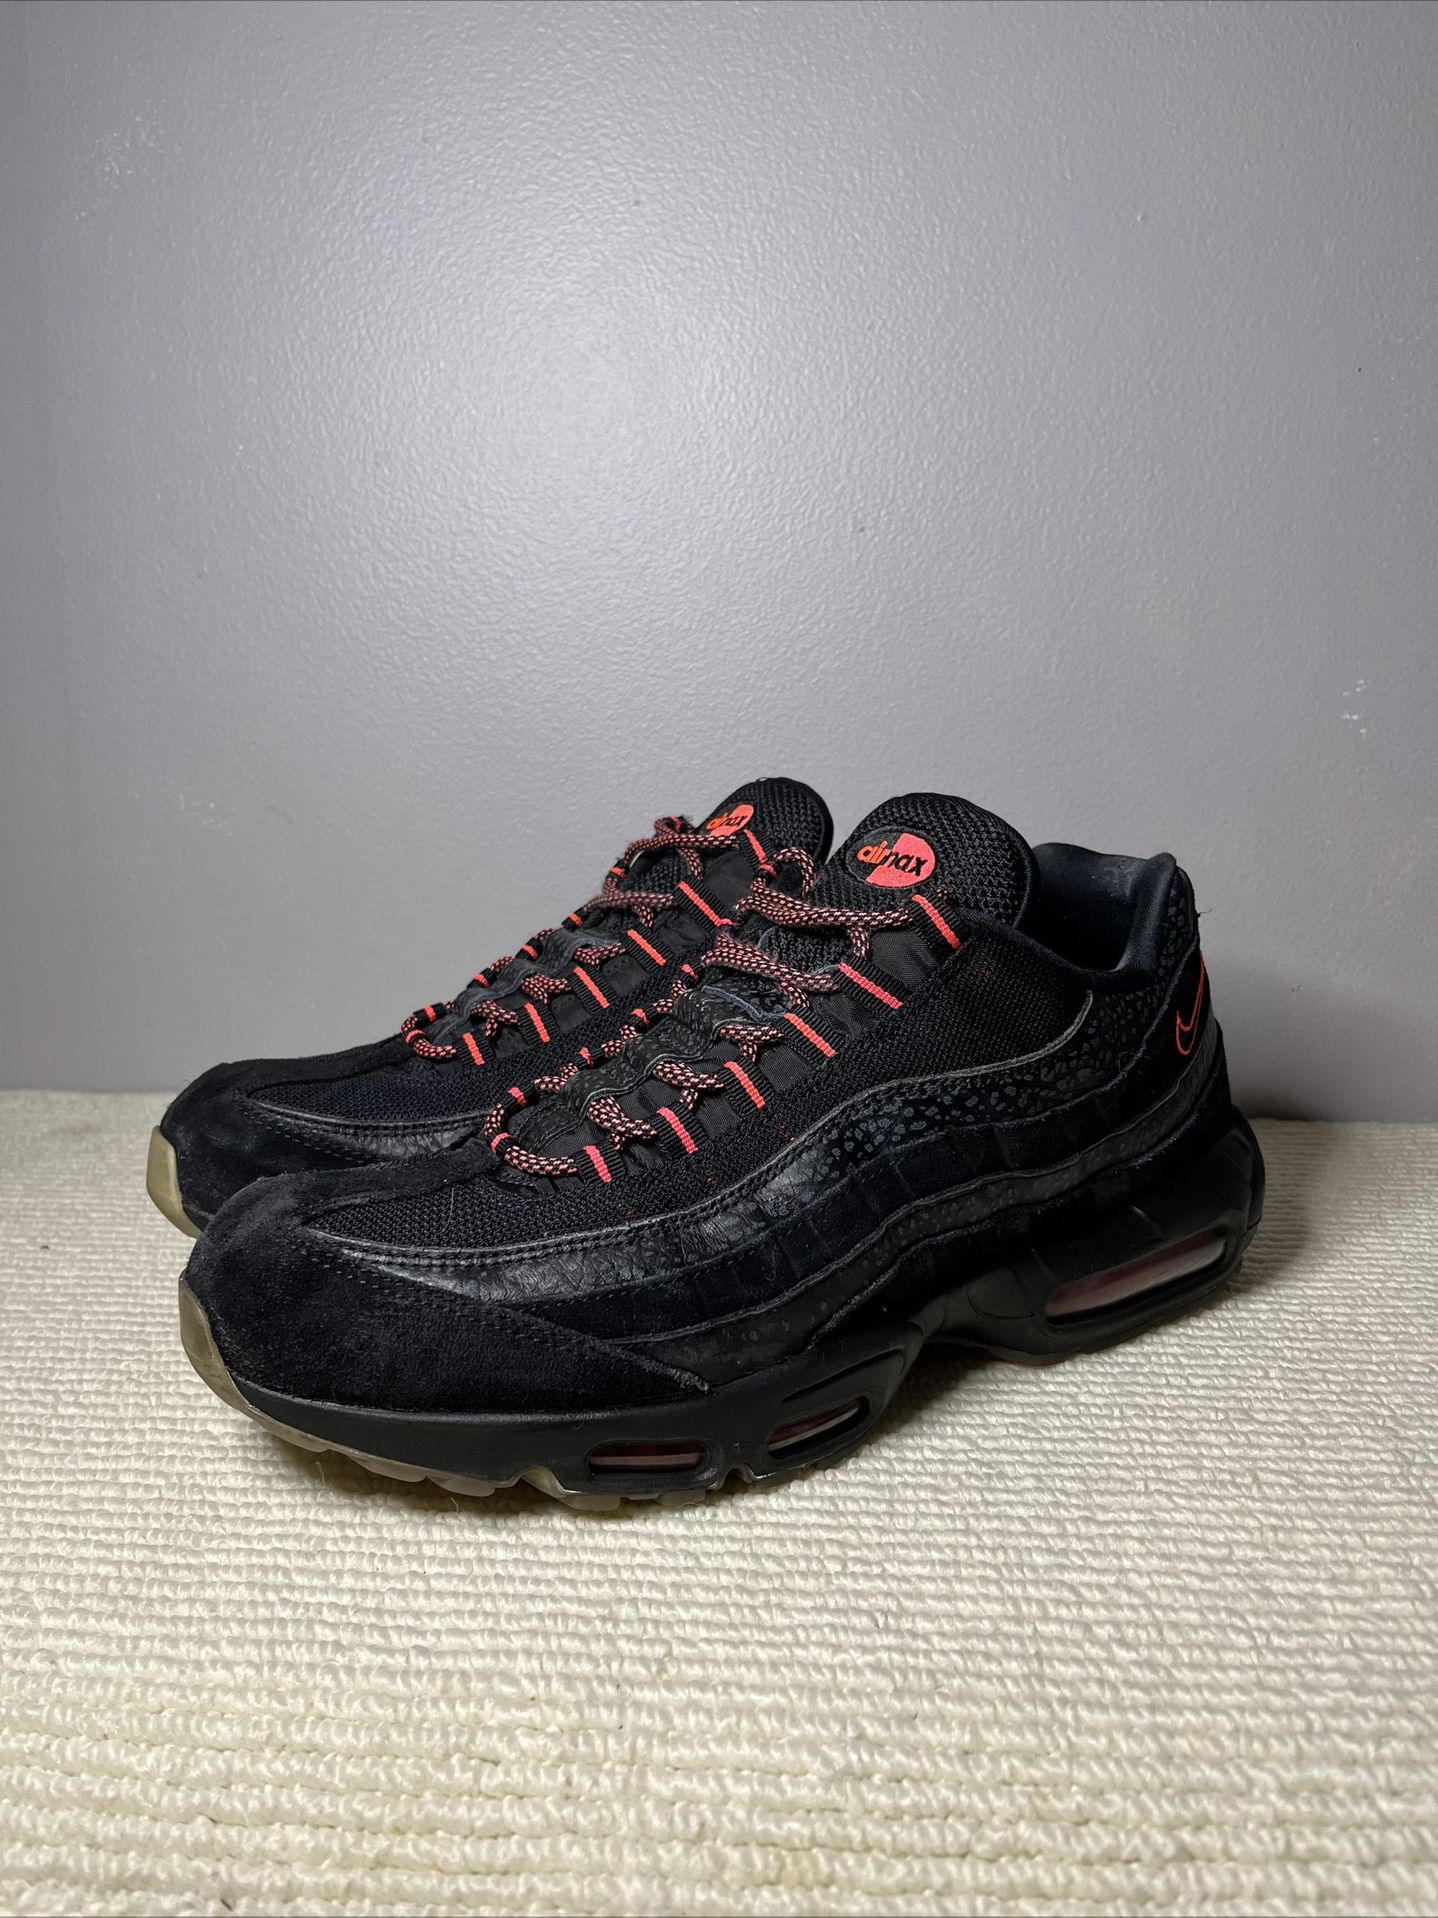 Air Max 95 Infrared Size 14 for Sale in Mukilteo, WA - OfferUp